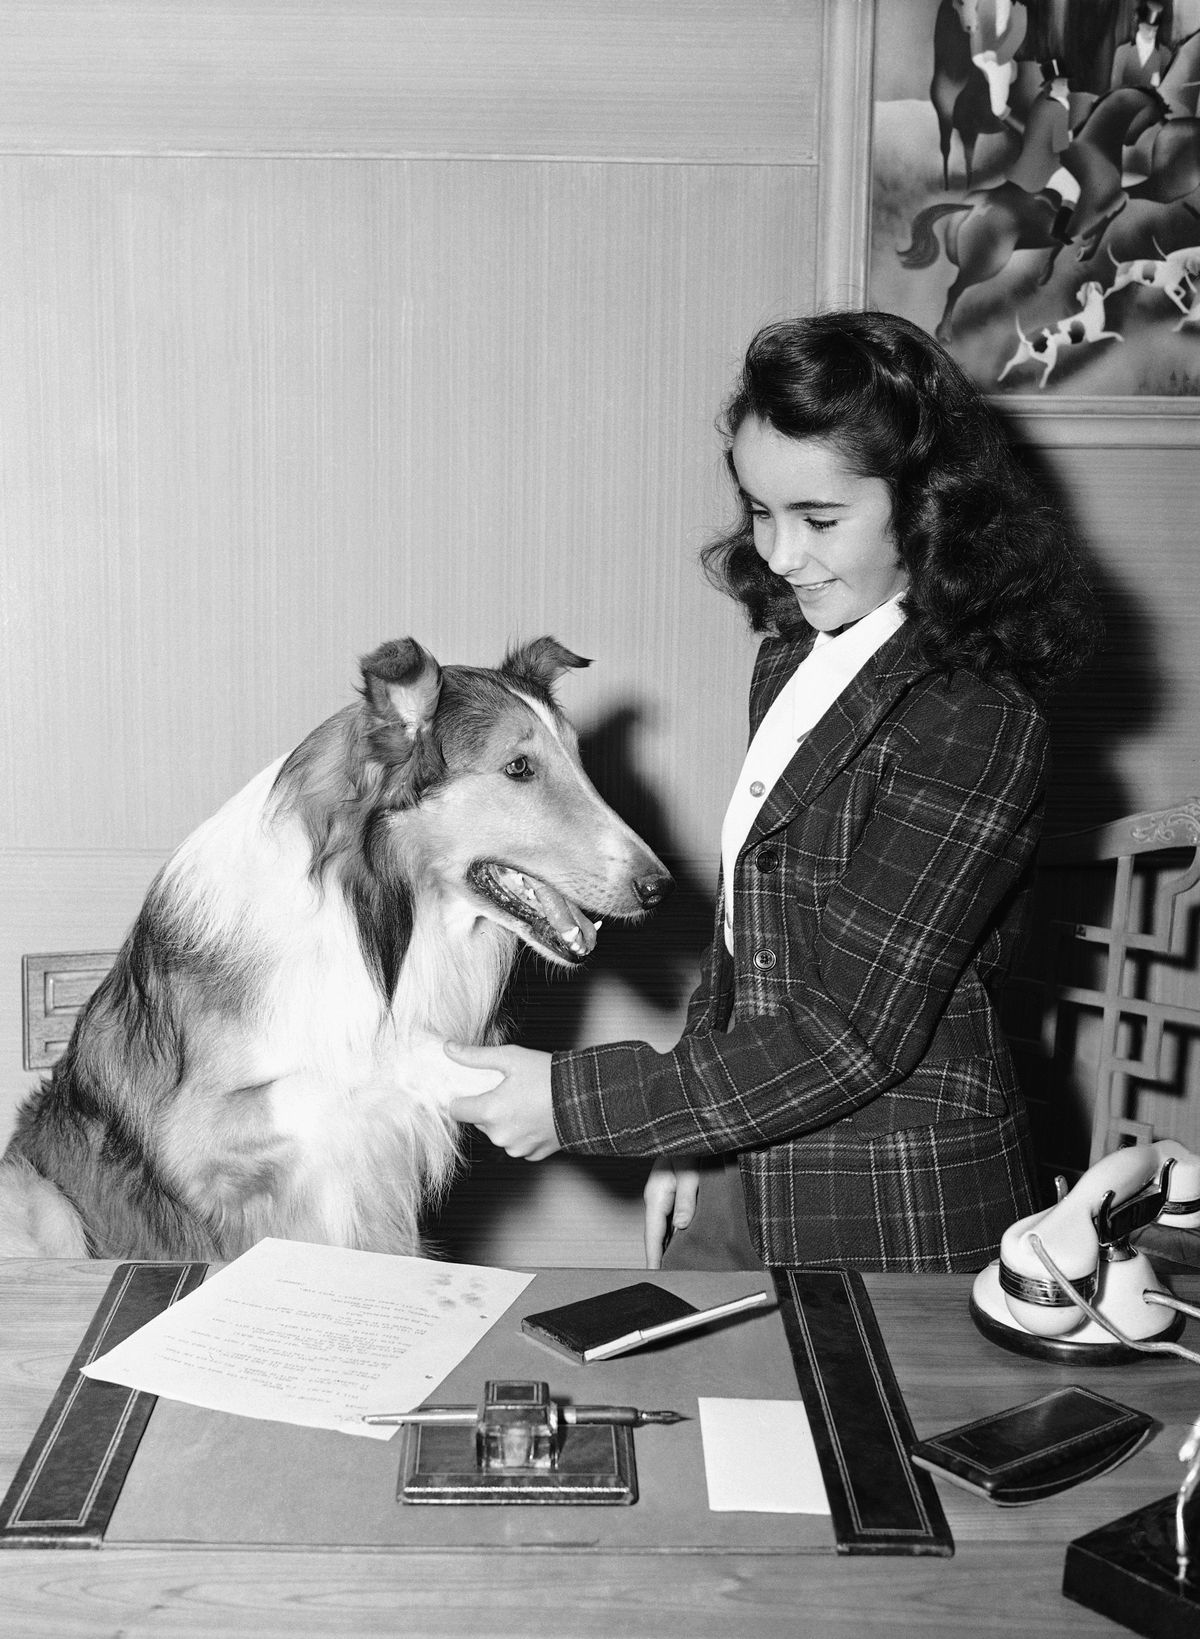 FILE - In this 1943 file photo, 11- year-old Elizabeth Taylor is shown with Lassie around the time of her performance in "Lassie Comes Home" in Los Angeles. Publicist Sally Morrison says the actress died Wednesday, March 23, 2011 in Los Angeles of congestive heart failure at age 79. (Associated Press)